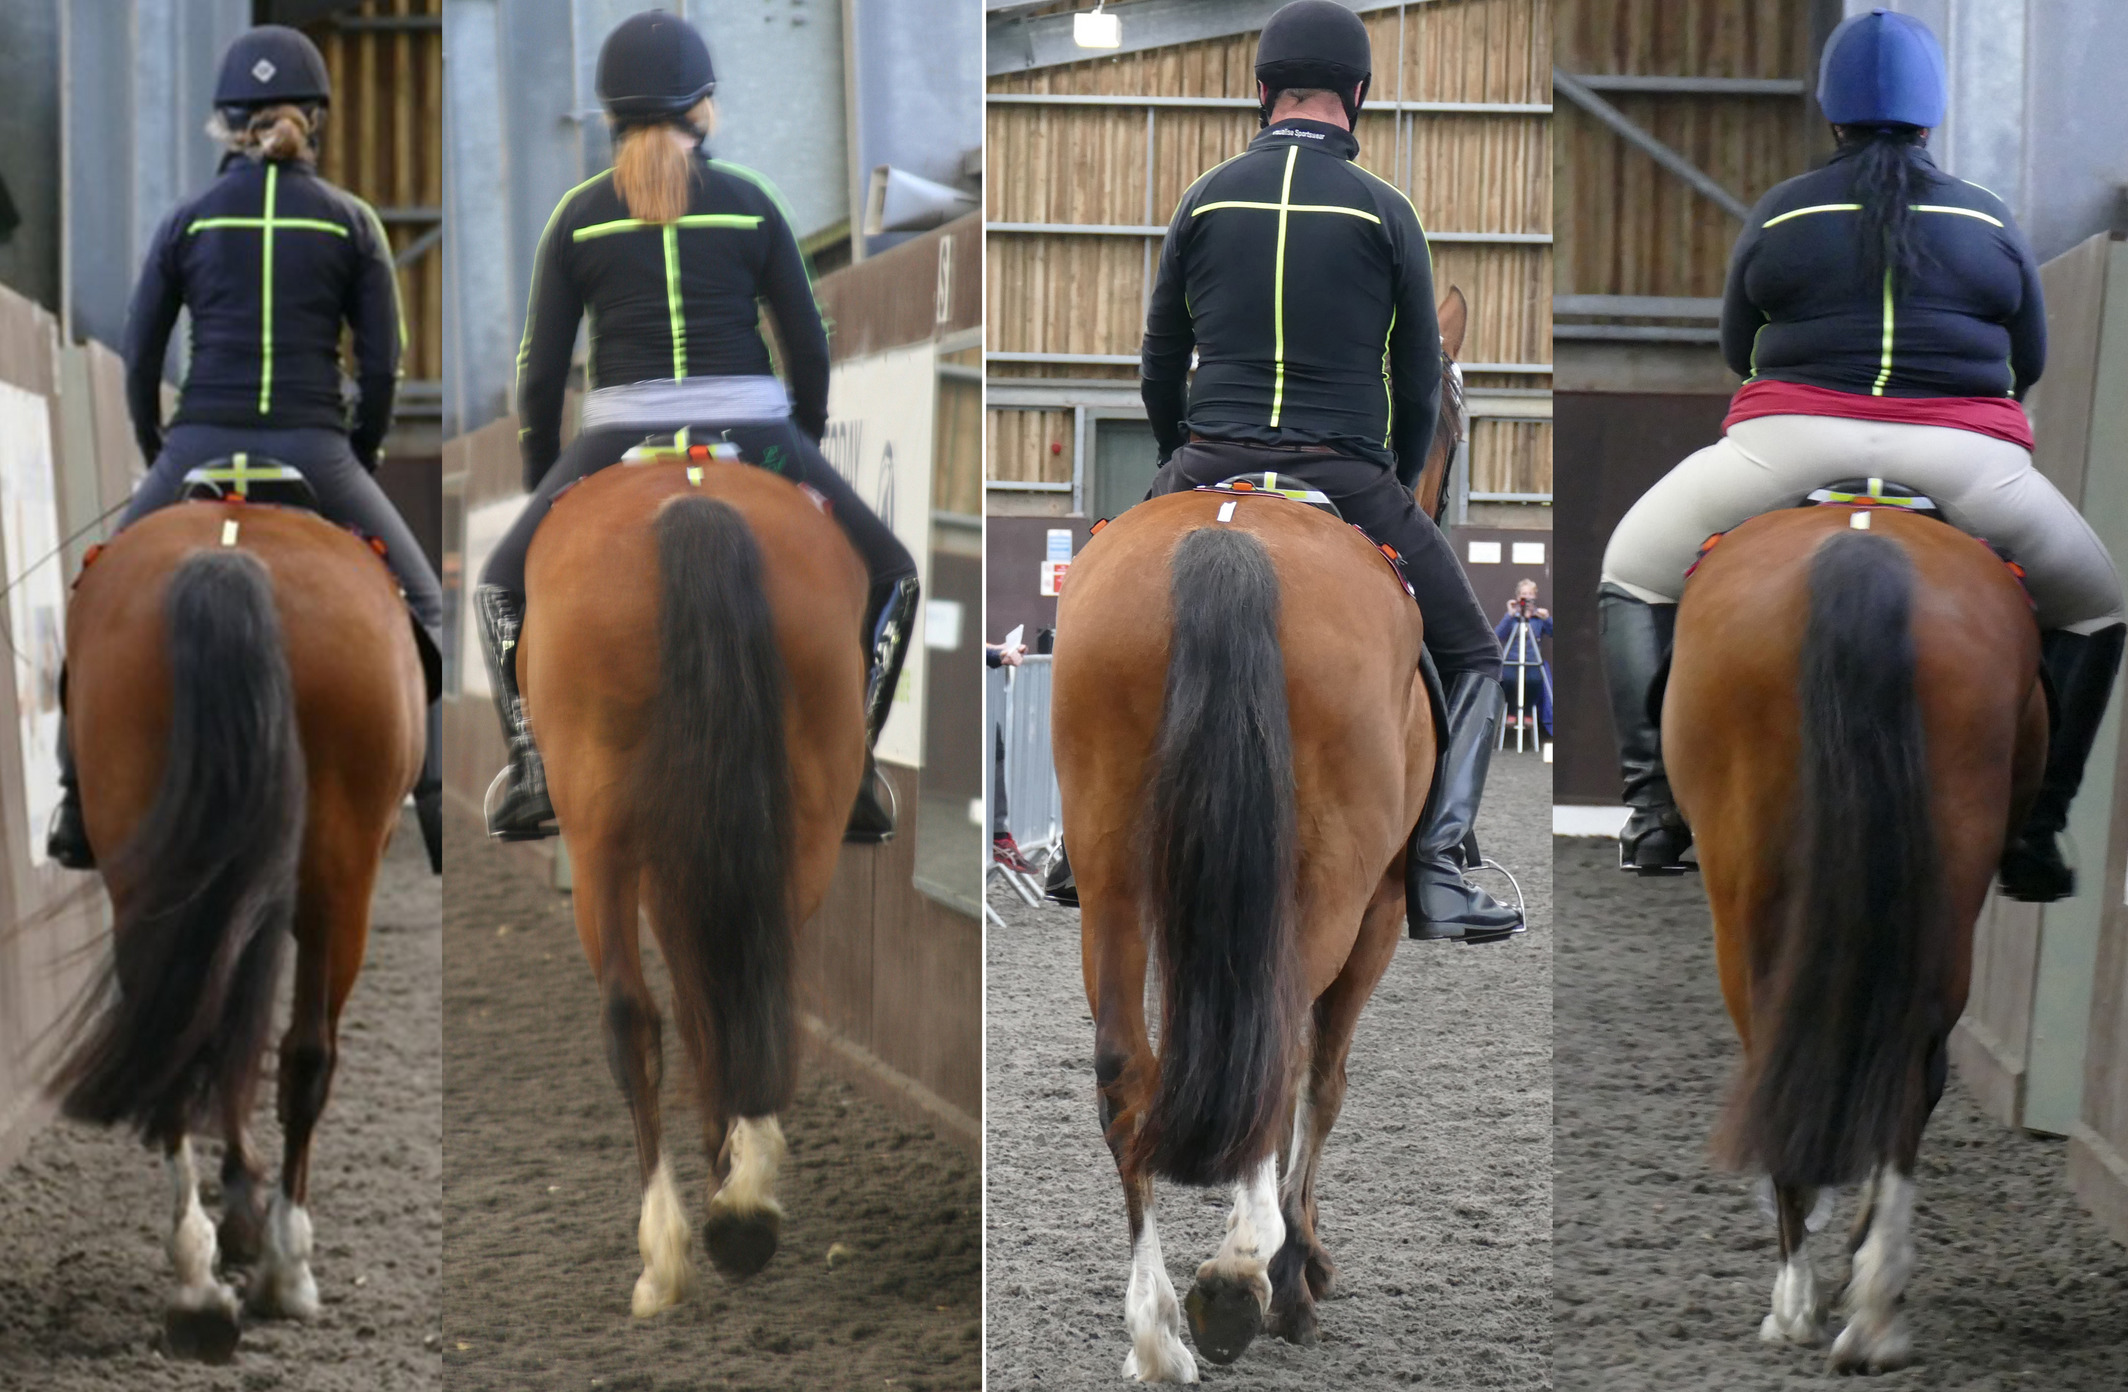 Caudal images of the four riders, from left to right, Light (L), Moderate (M), Heavy (H) and Very Heavy (VH) on Horse 2.